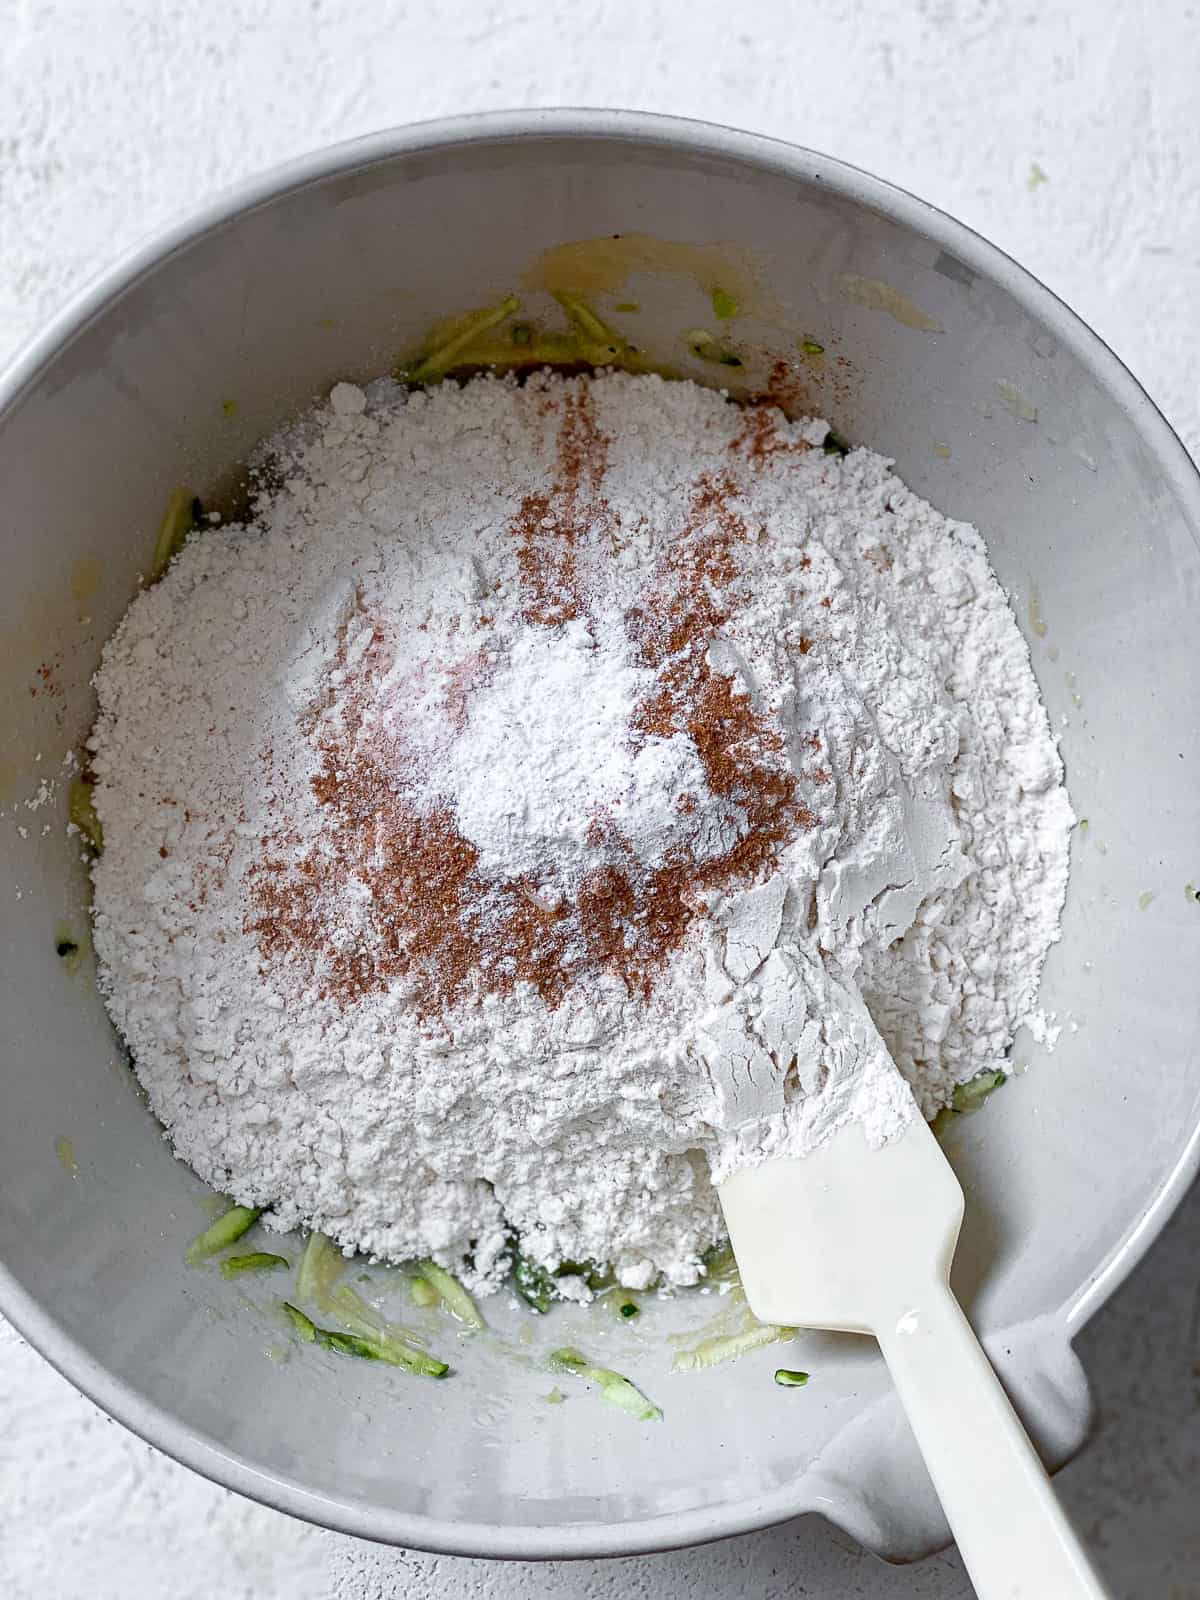 All the ingredients for zucchini bread in a white bowl with white spatula over a textured white surface.